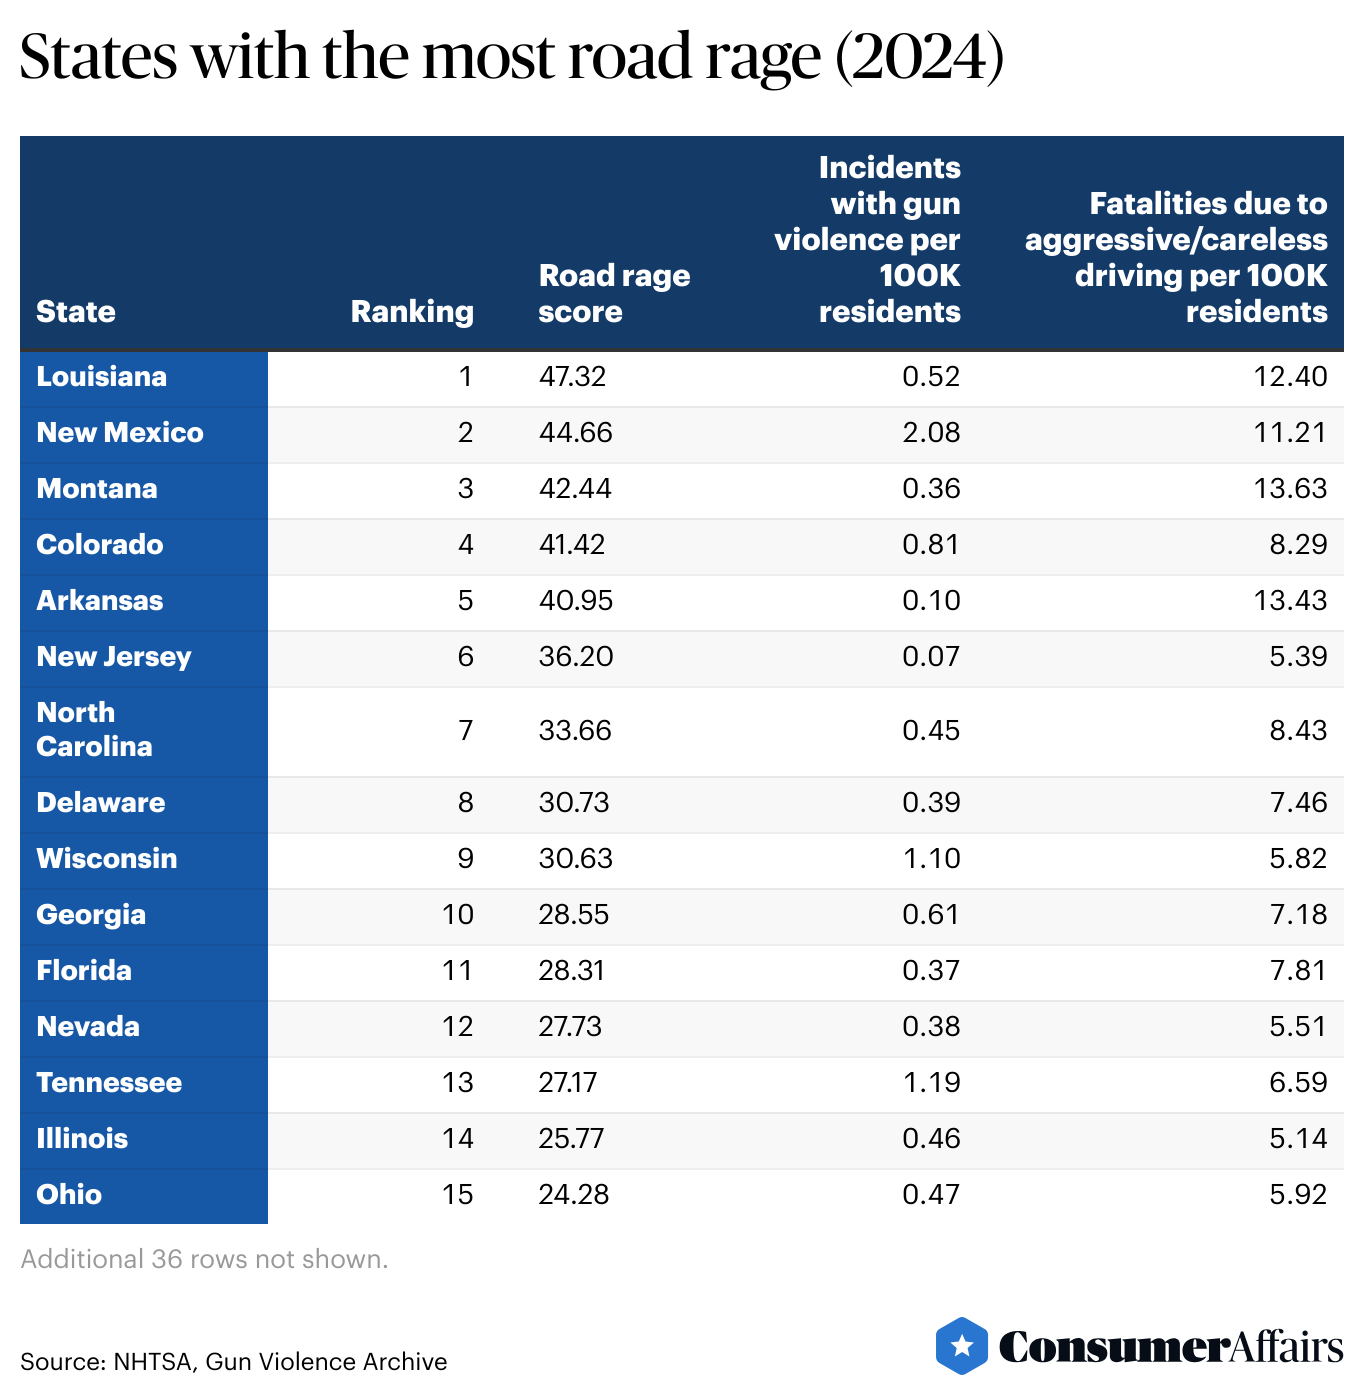 Table showing “States with the most road rage (2024)”.